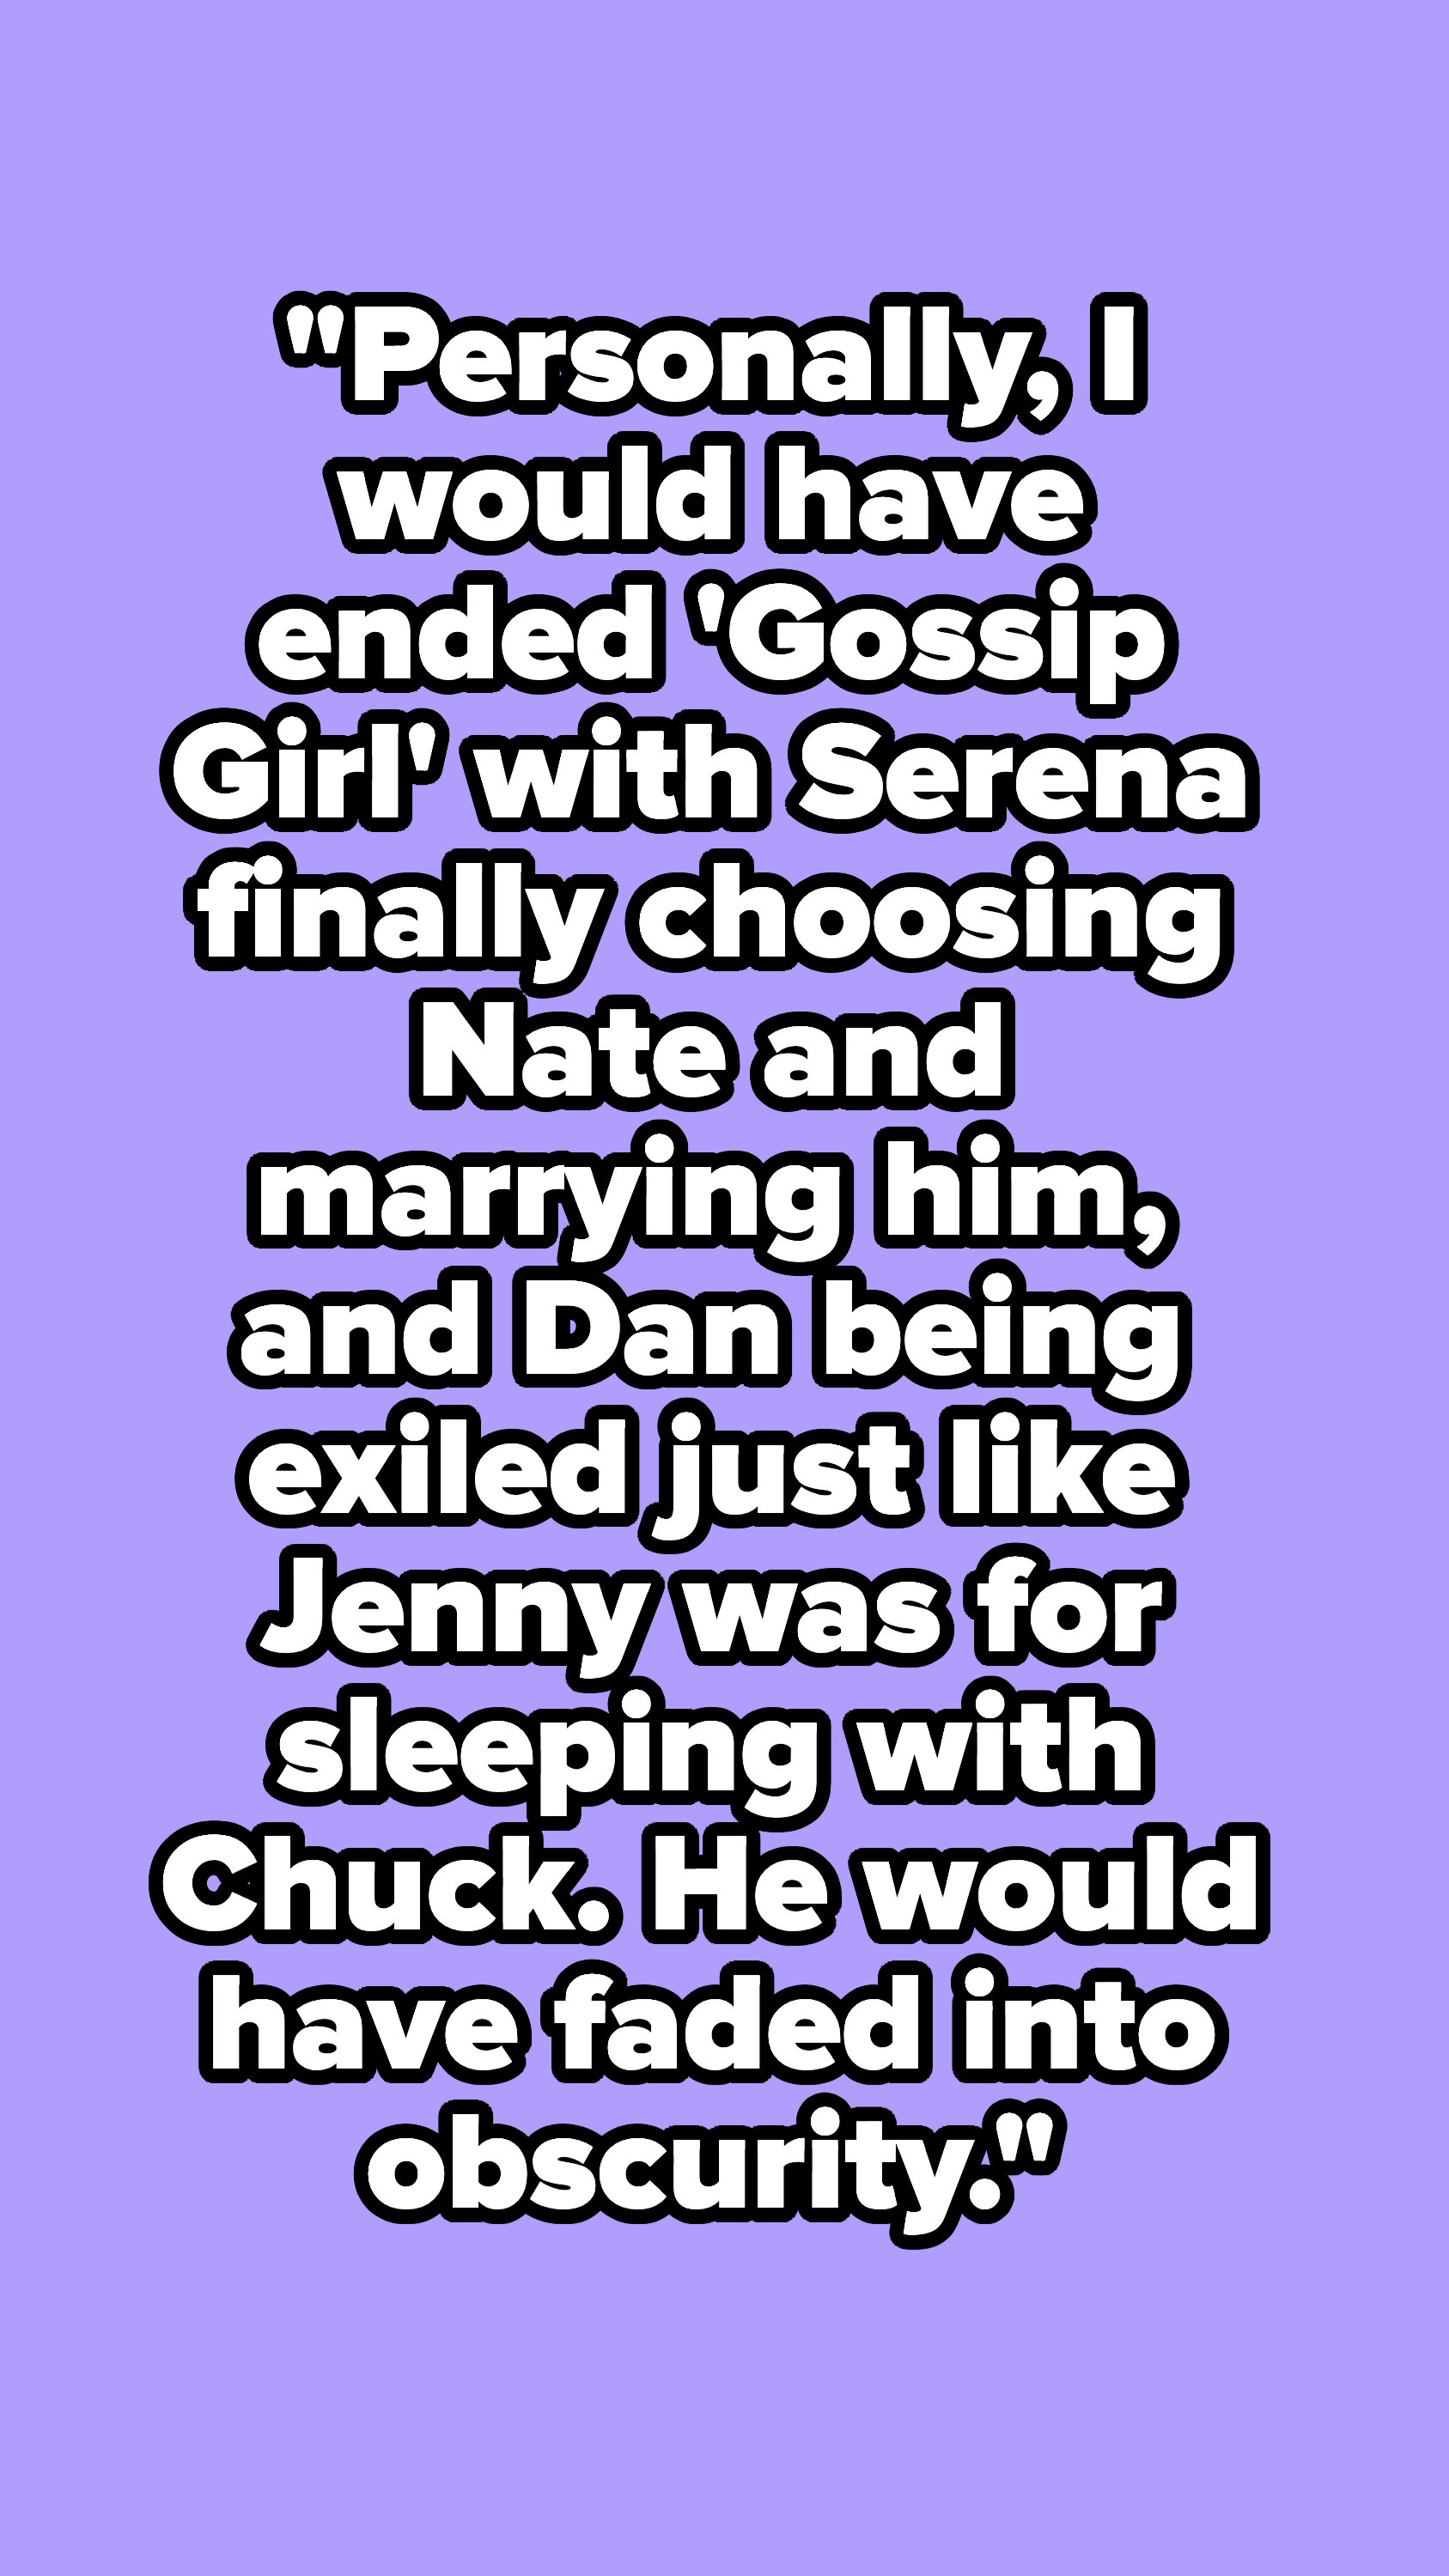 &quot;I would have ended &#x27;Gossip Girl&#x27; with Serena finally choosing Nate and marrying him, and Dan being exiled.&quot;